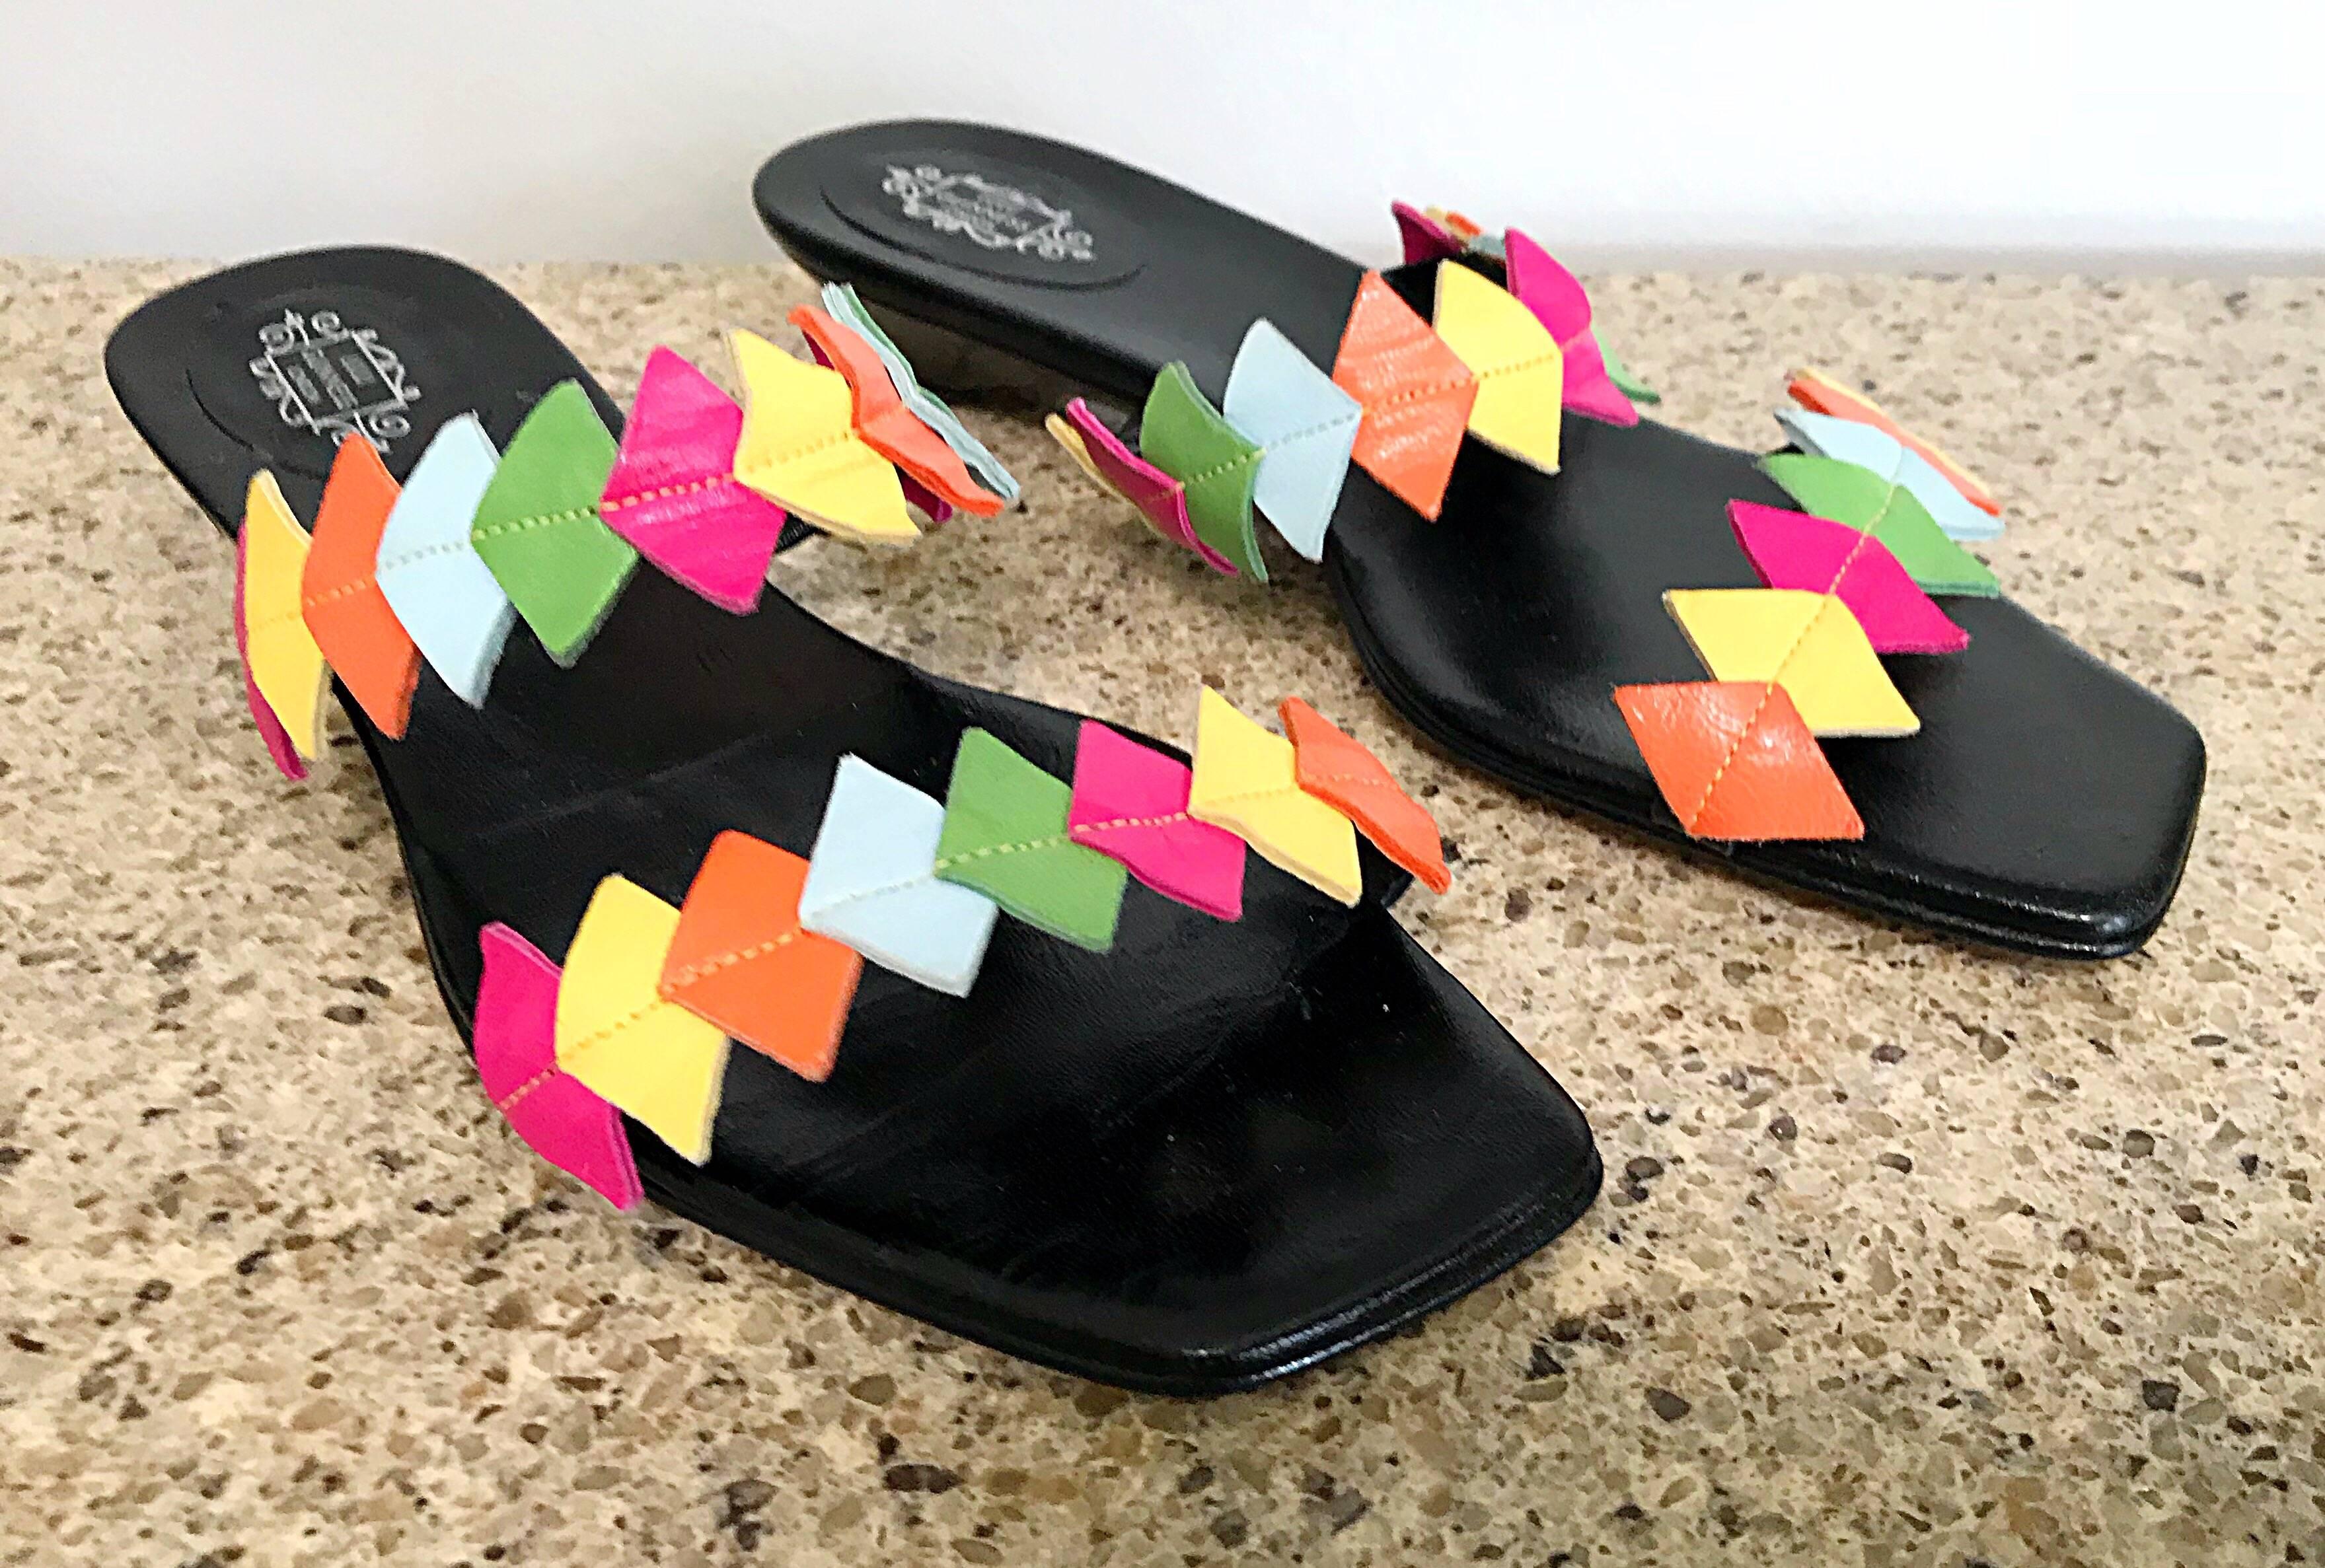 Brand new, never worn 90s LULU GUINNESS colorful kitten heel wedges sandals! Feature leather diamond shapes straps in pink, yellow, orange, light blue, and green. Sensible low wedge heel. The perfect pair of shoes that really adds just the right